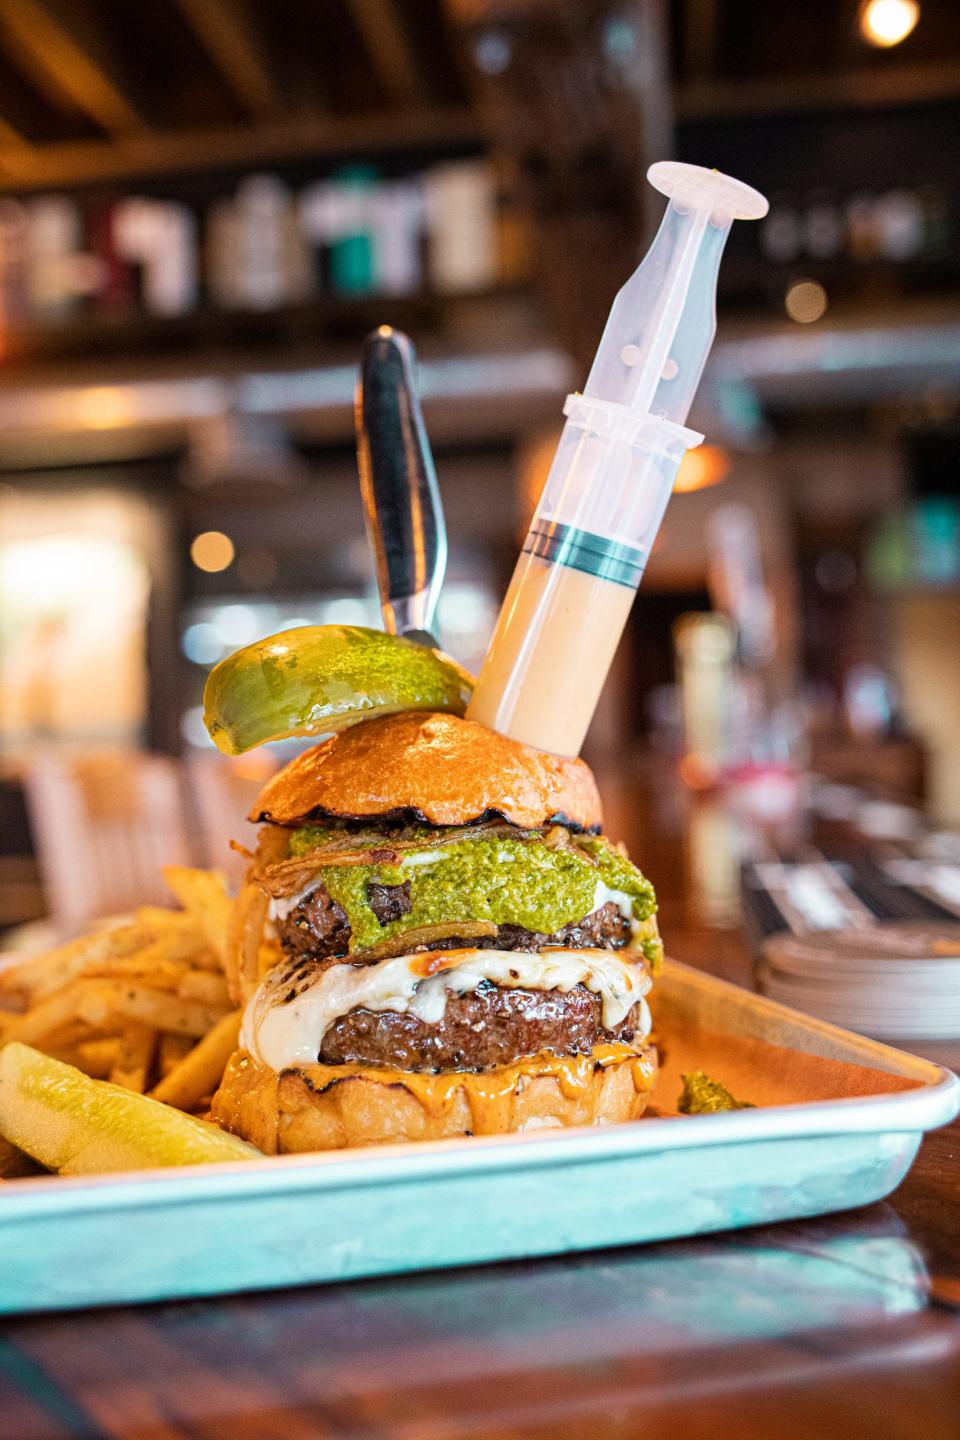 The Fifth Element's entry into the Newport Burger Bender features a diner-controlled spicy blend of queso fuego, a chili-infused cheese sauce. Want to enjoy more heat, inject more of the sauce.